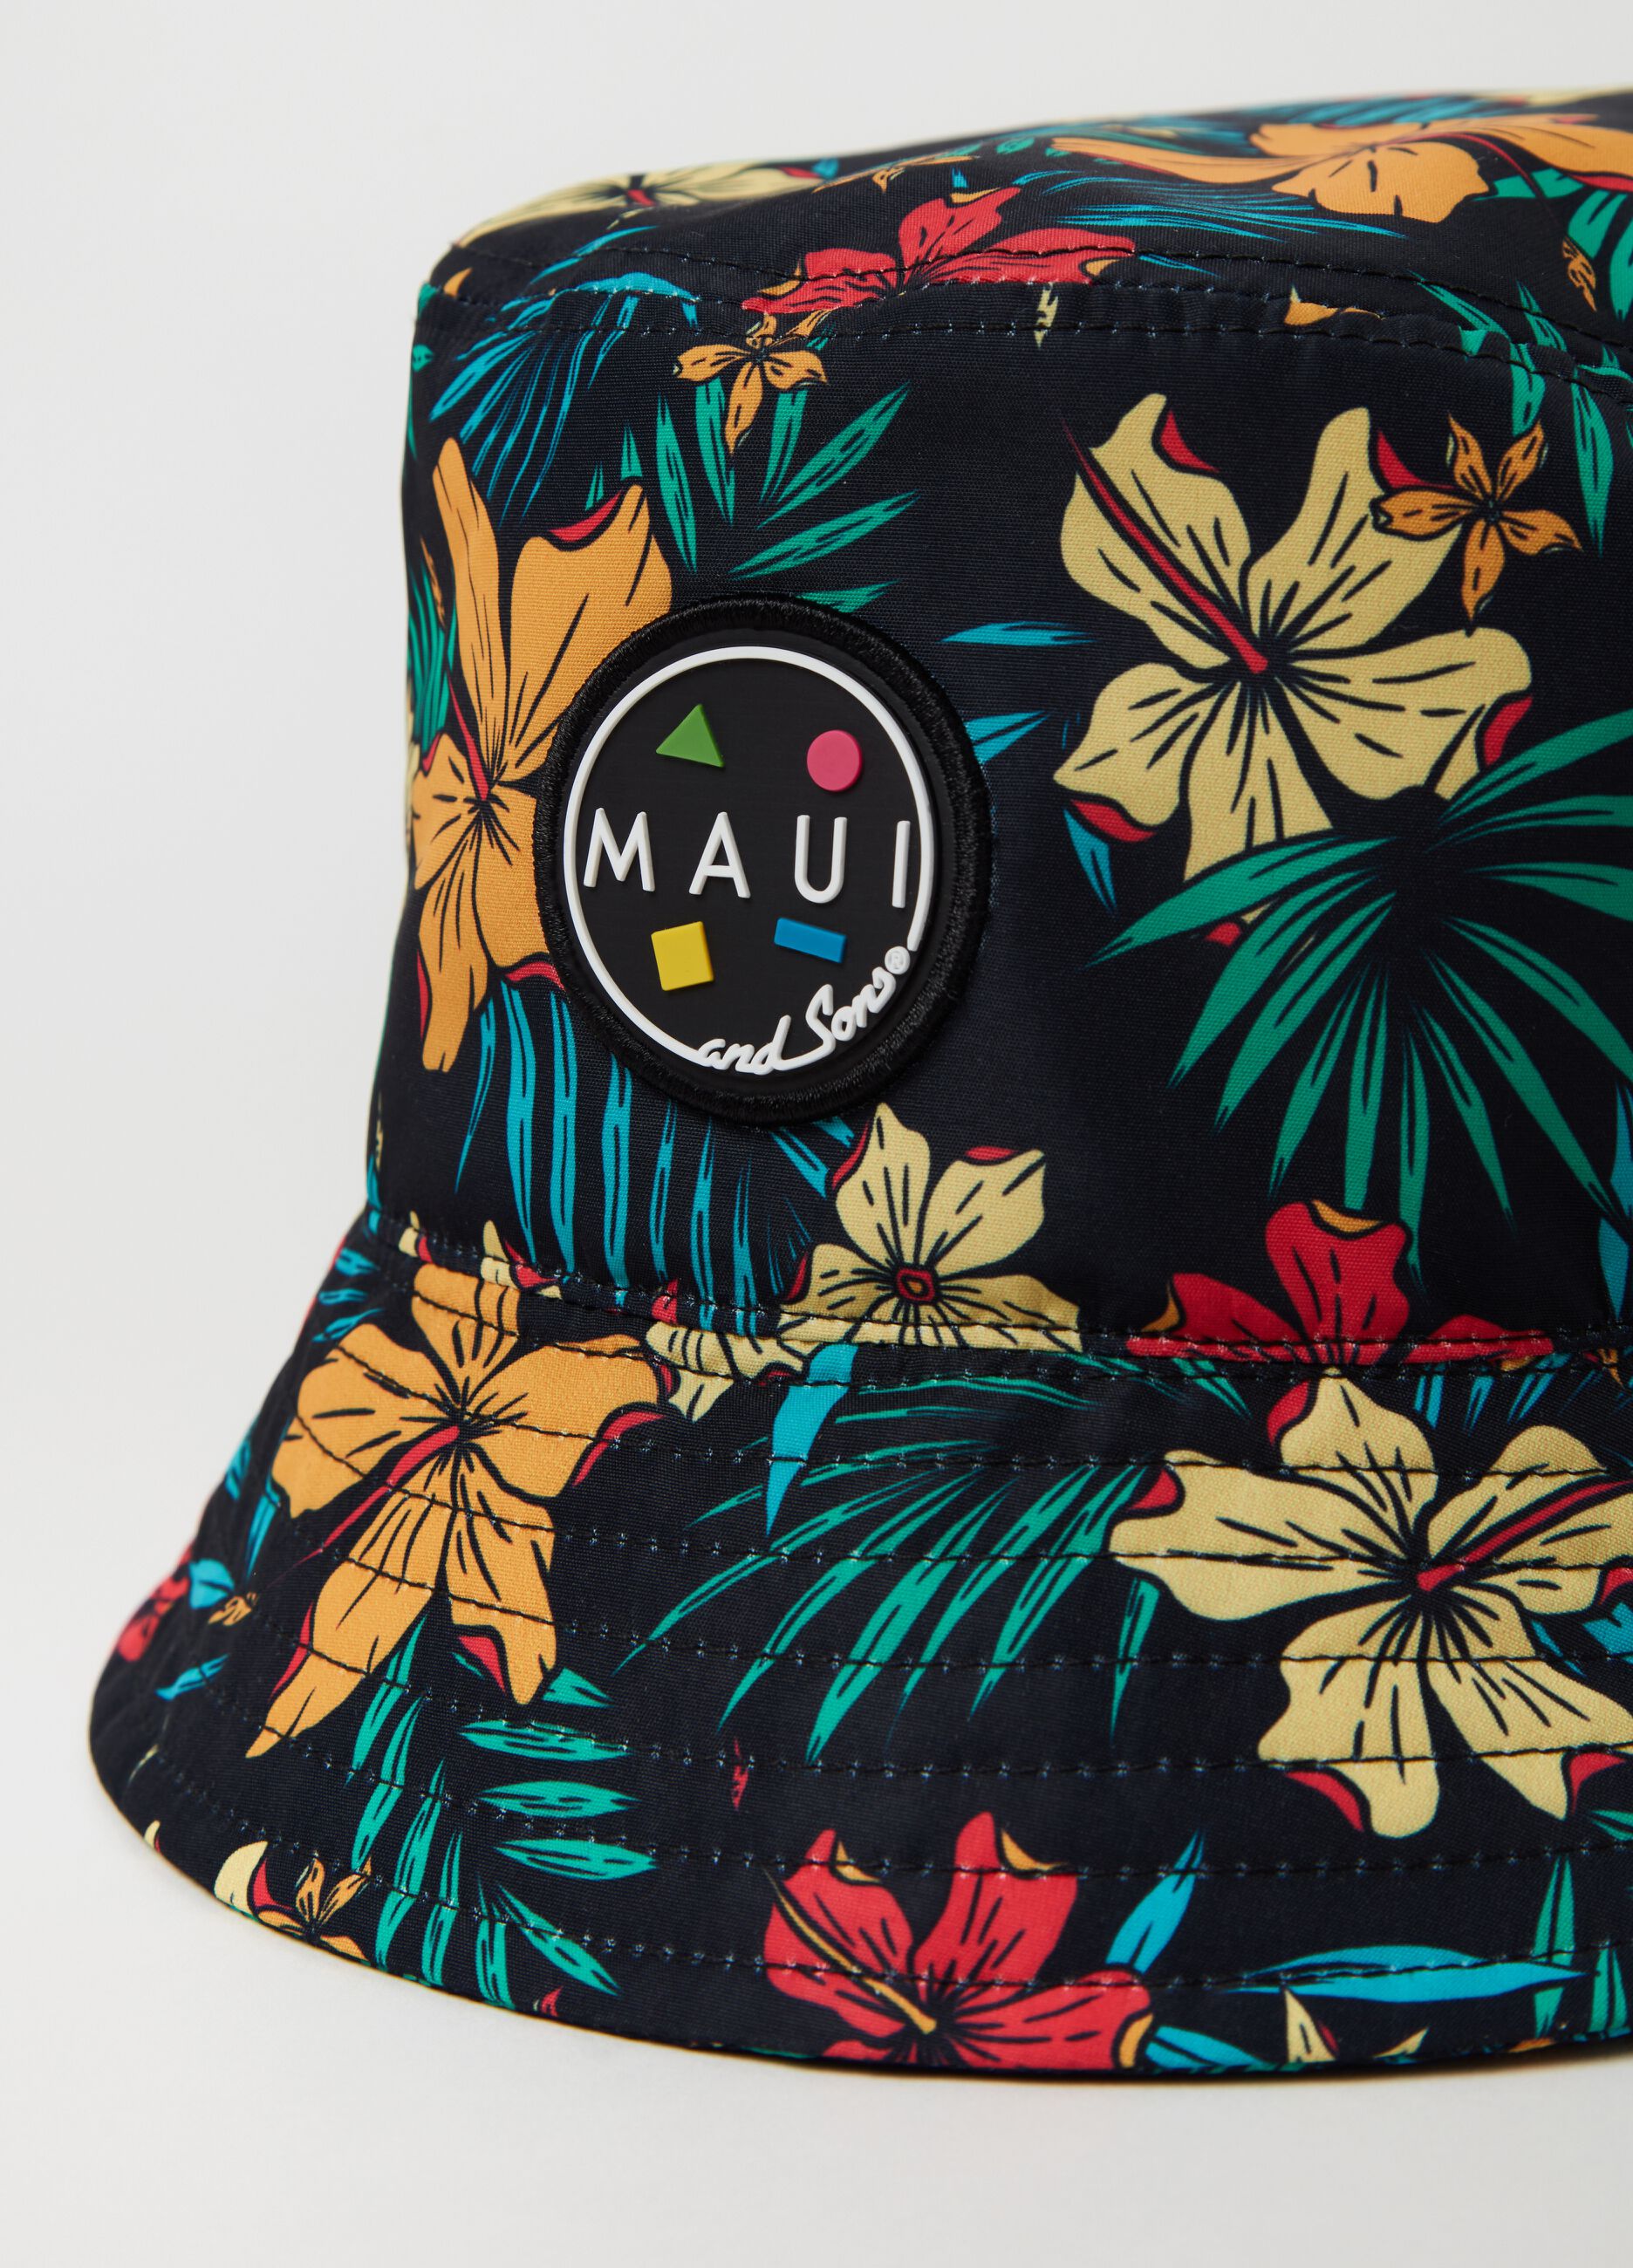 Maui and Sons fishing hat